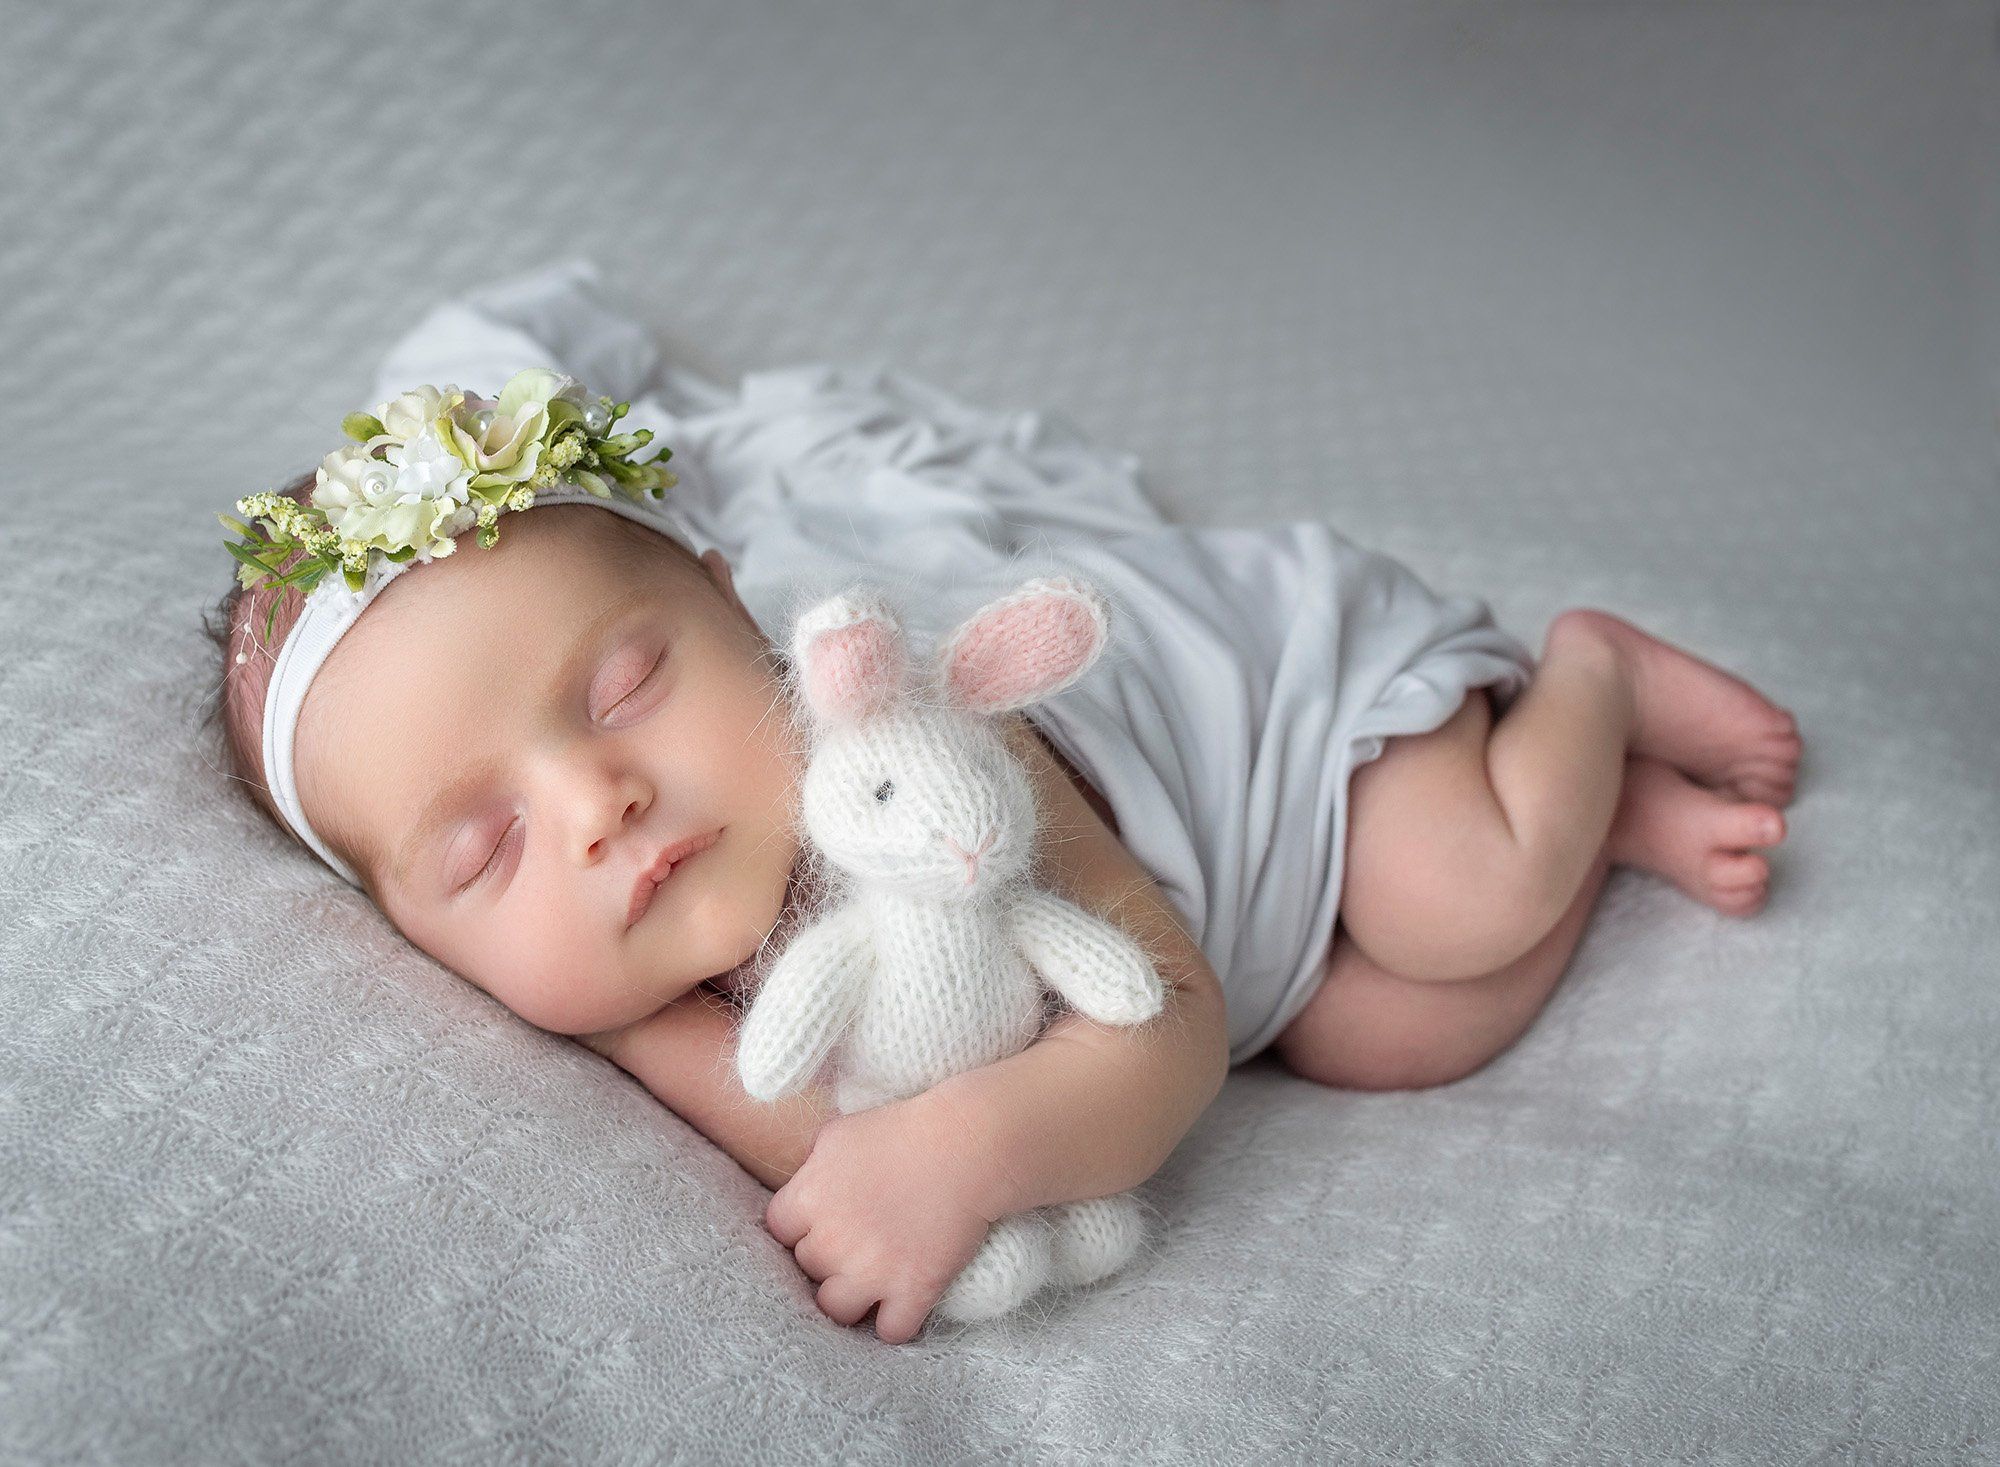 newborn baby girl asleep holding fuzzy bunny with white blanket draped over her